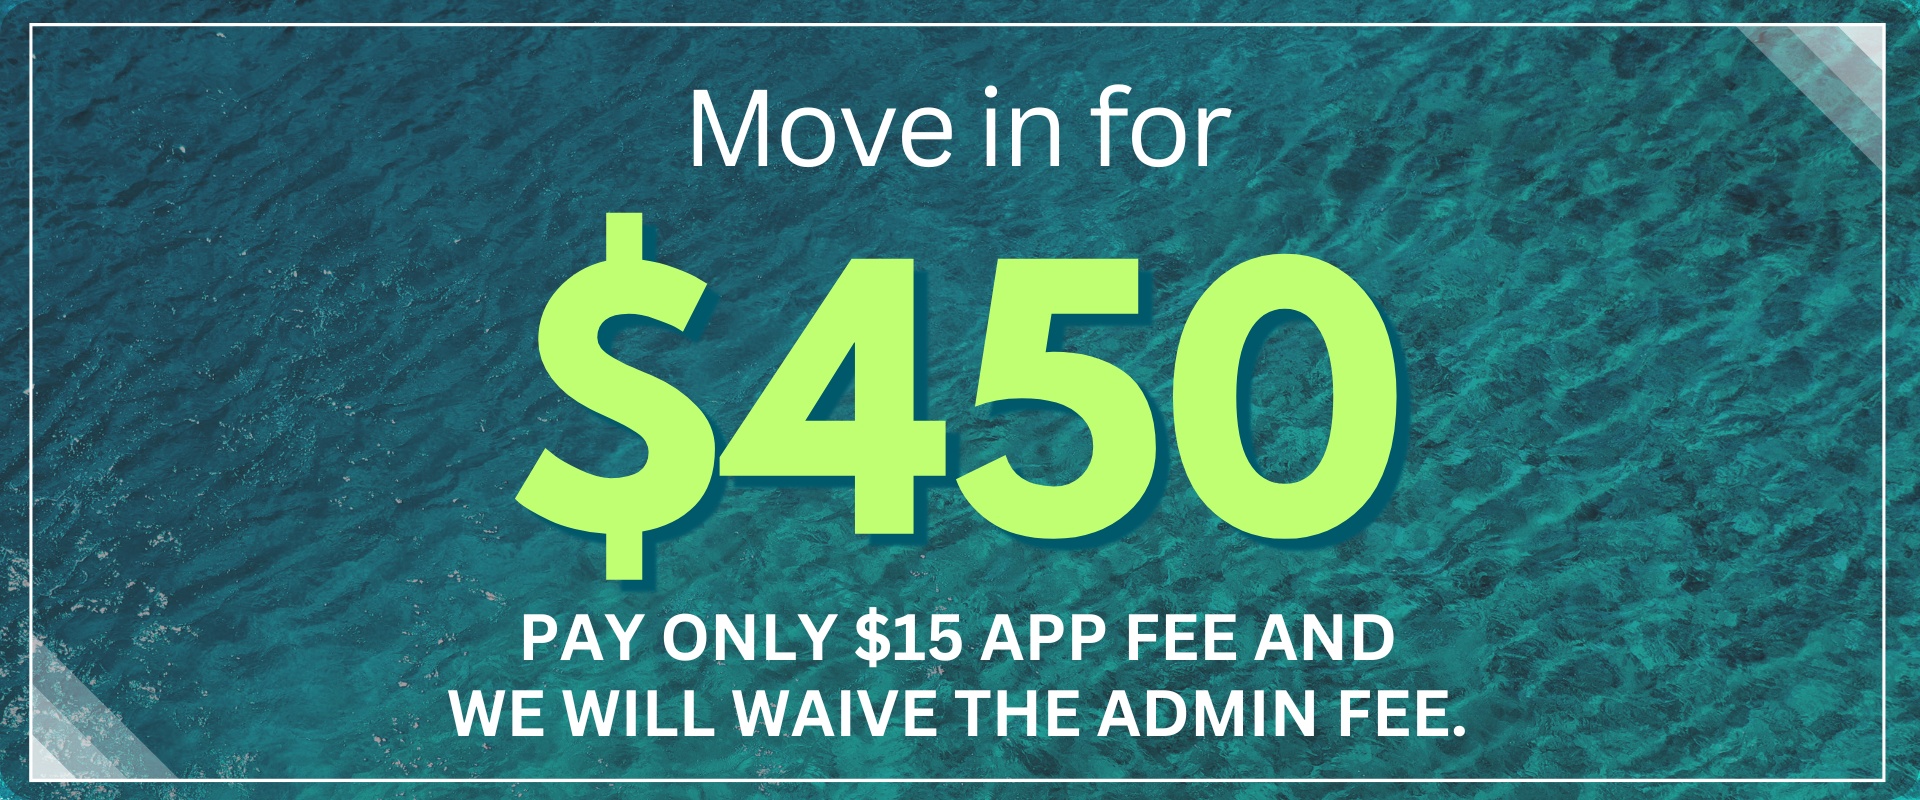 move in for $450.00 pay only $15.00 app fee and we will waive the admin fee.